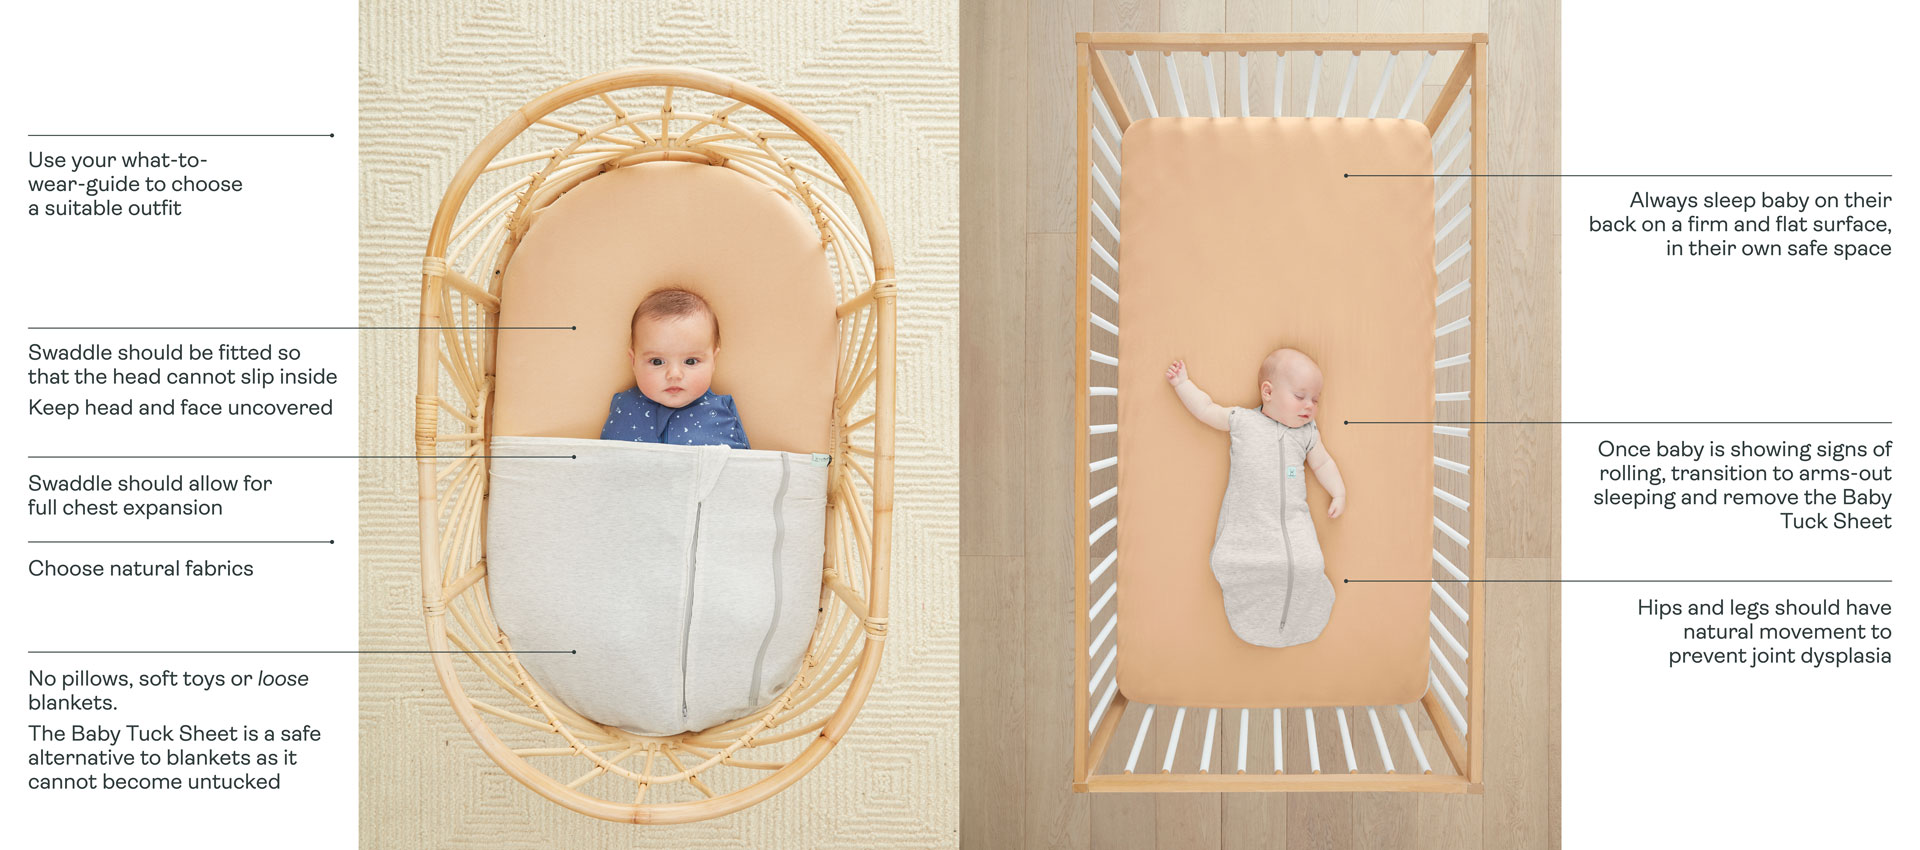 How to safely sleep a newborn in a bassinet or cot